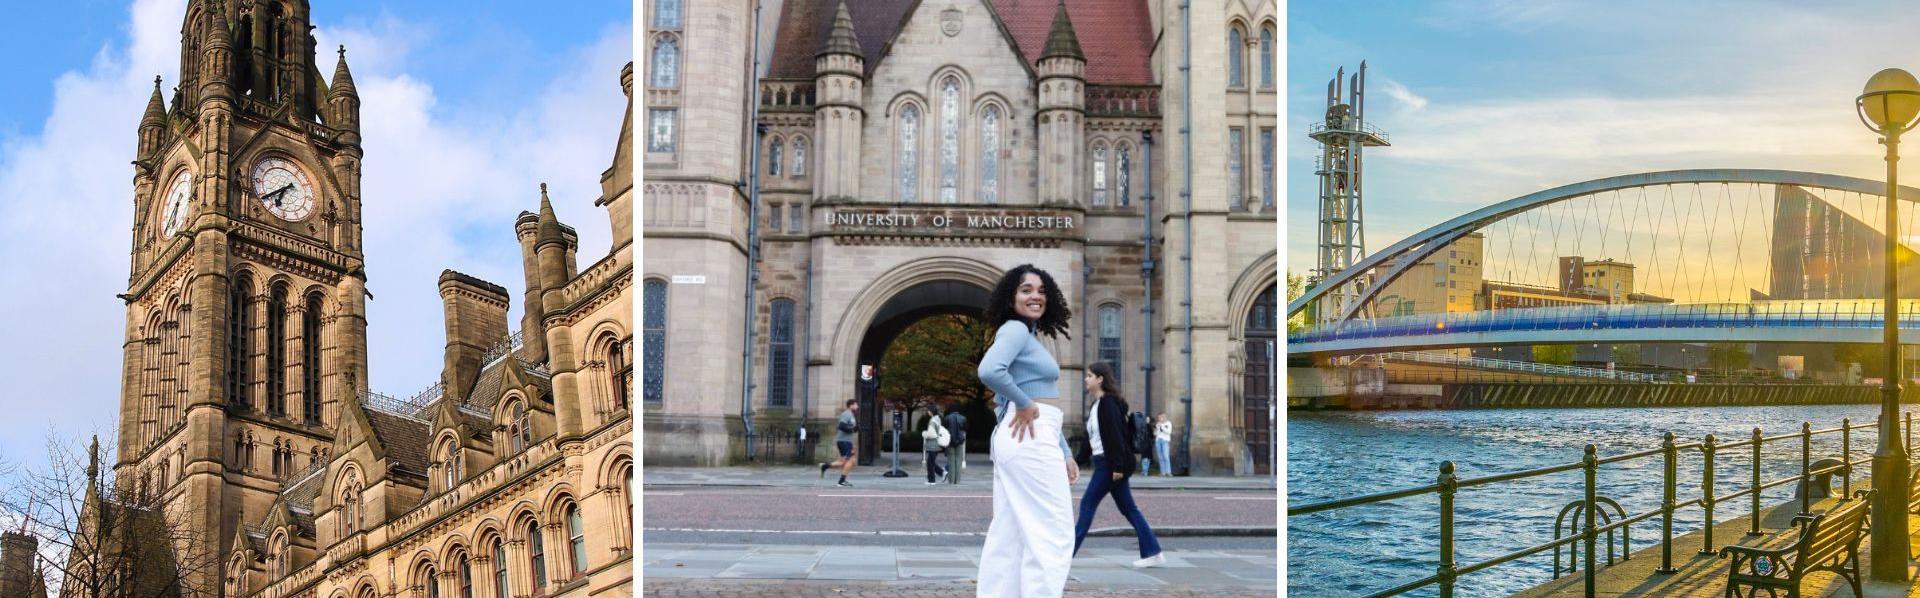 Sharellis Sepulveda, Study Abroad student in Manchester, UK